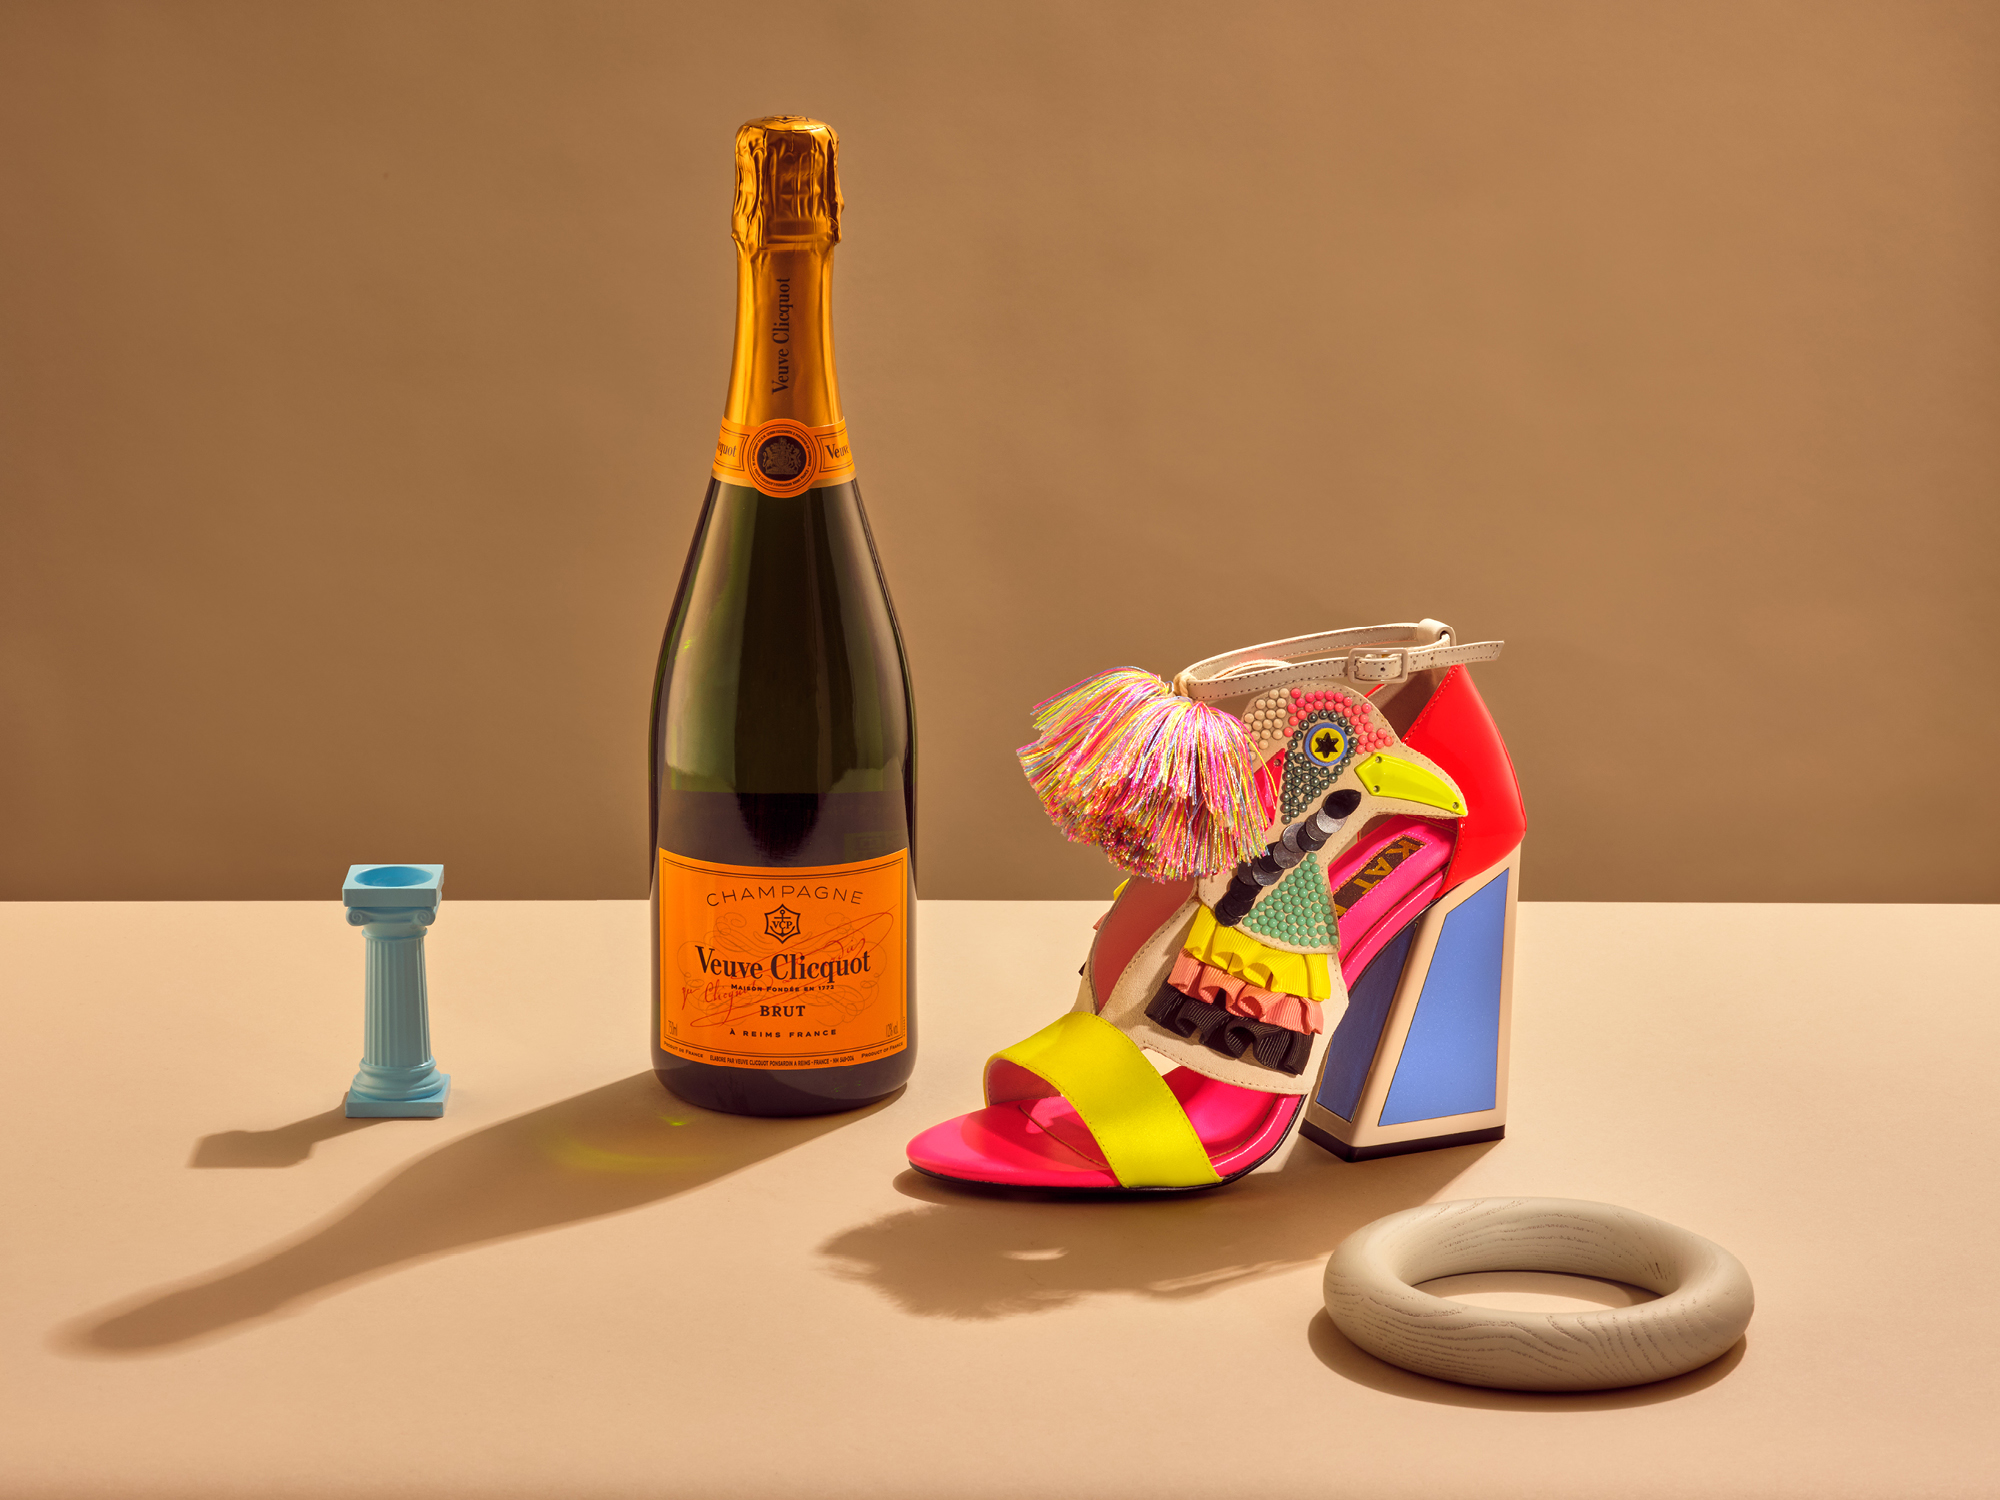 Kat Maconie and Veuve Cliquot have collaborated on a champagne terrace